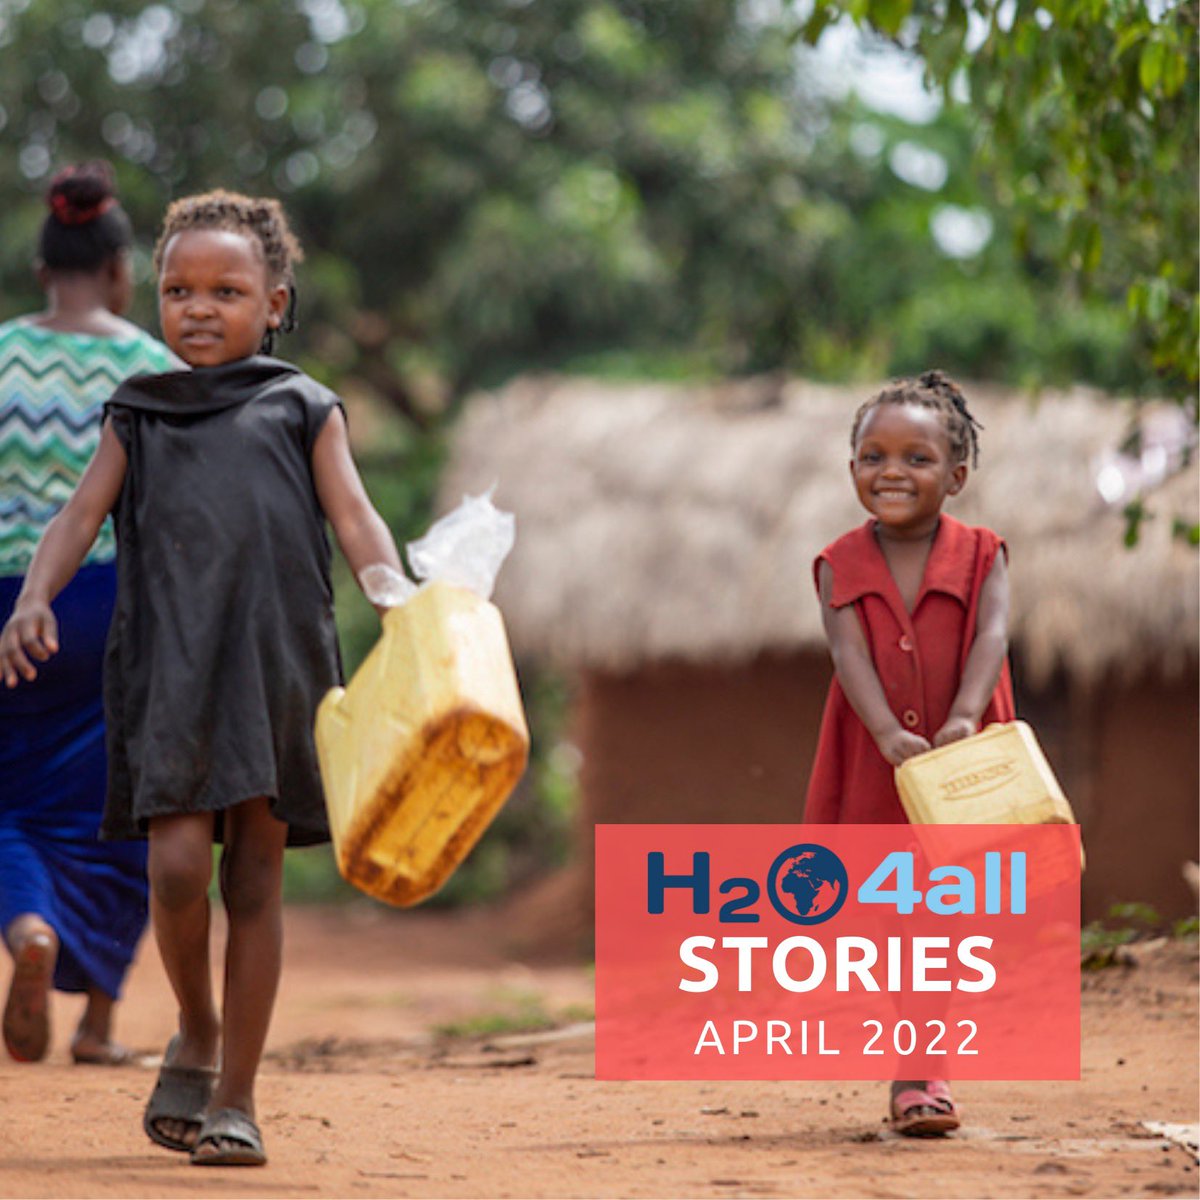 #H2O4ALLStories | Check out our April newsletter here: eepurl.com/h0lk-H

#safewater #safewaterforall #water #newsletter